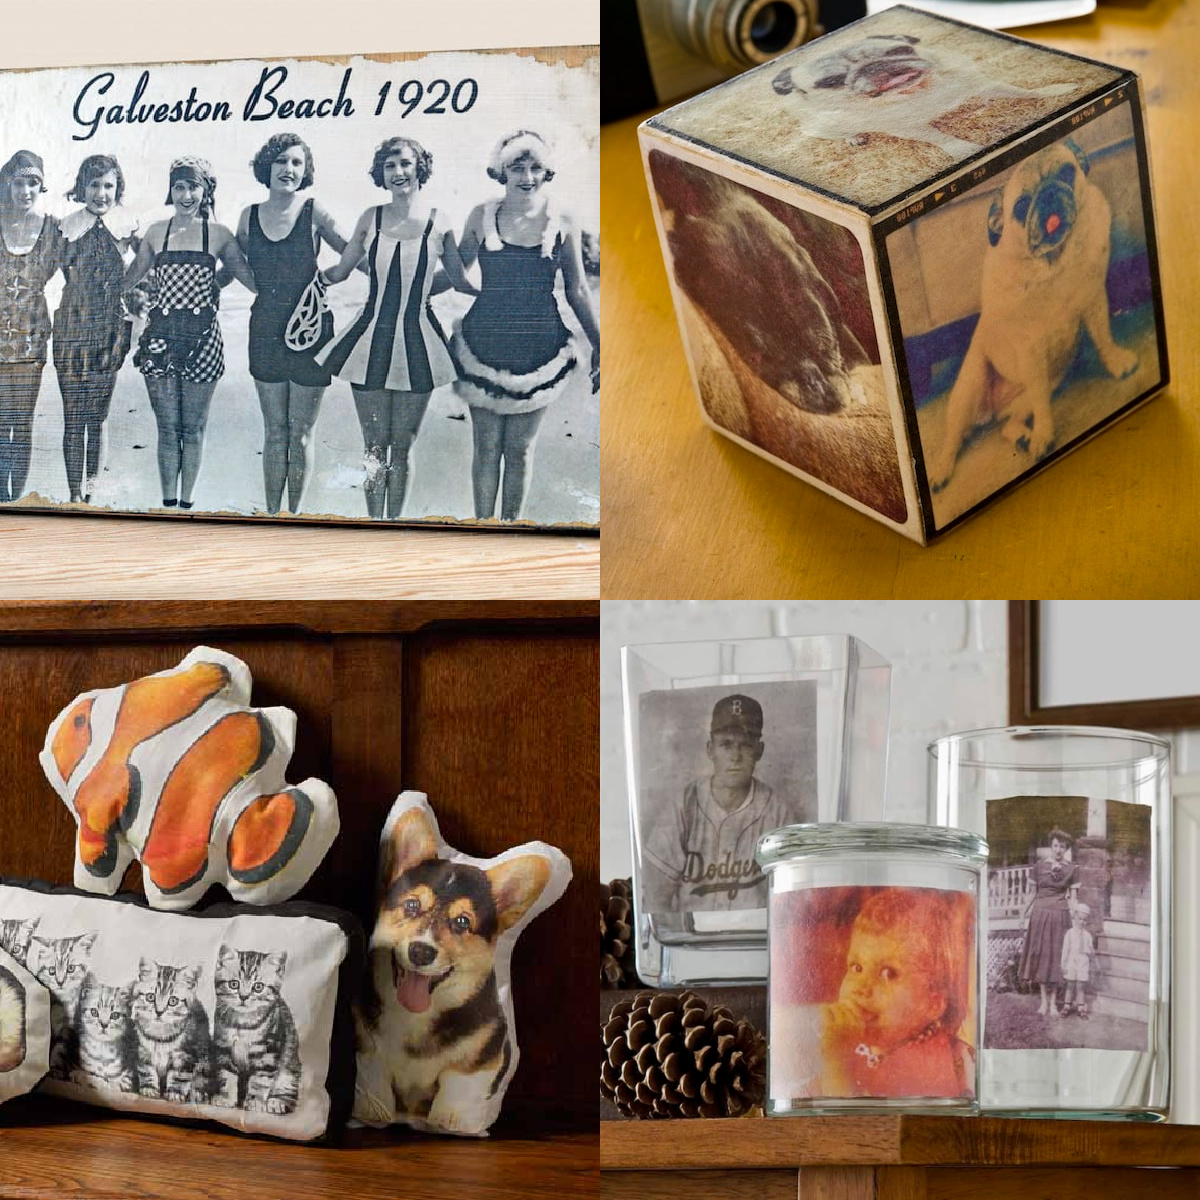 Use Mod Podge photo transfer medium to decorate vases with vintage